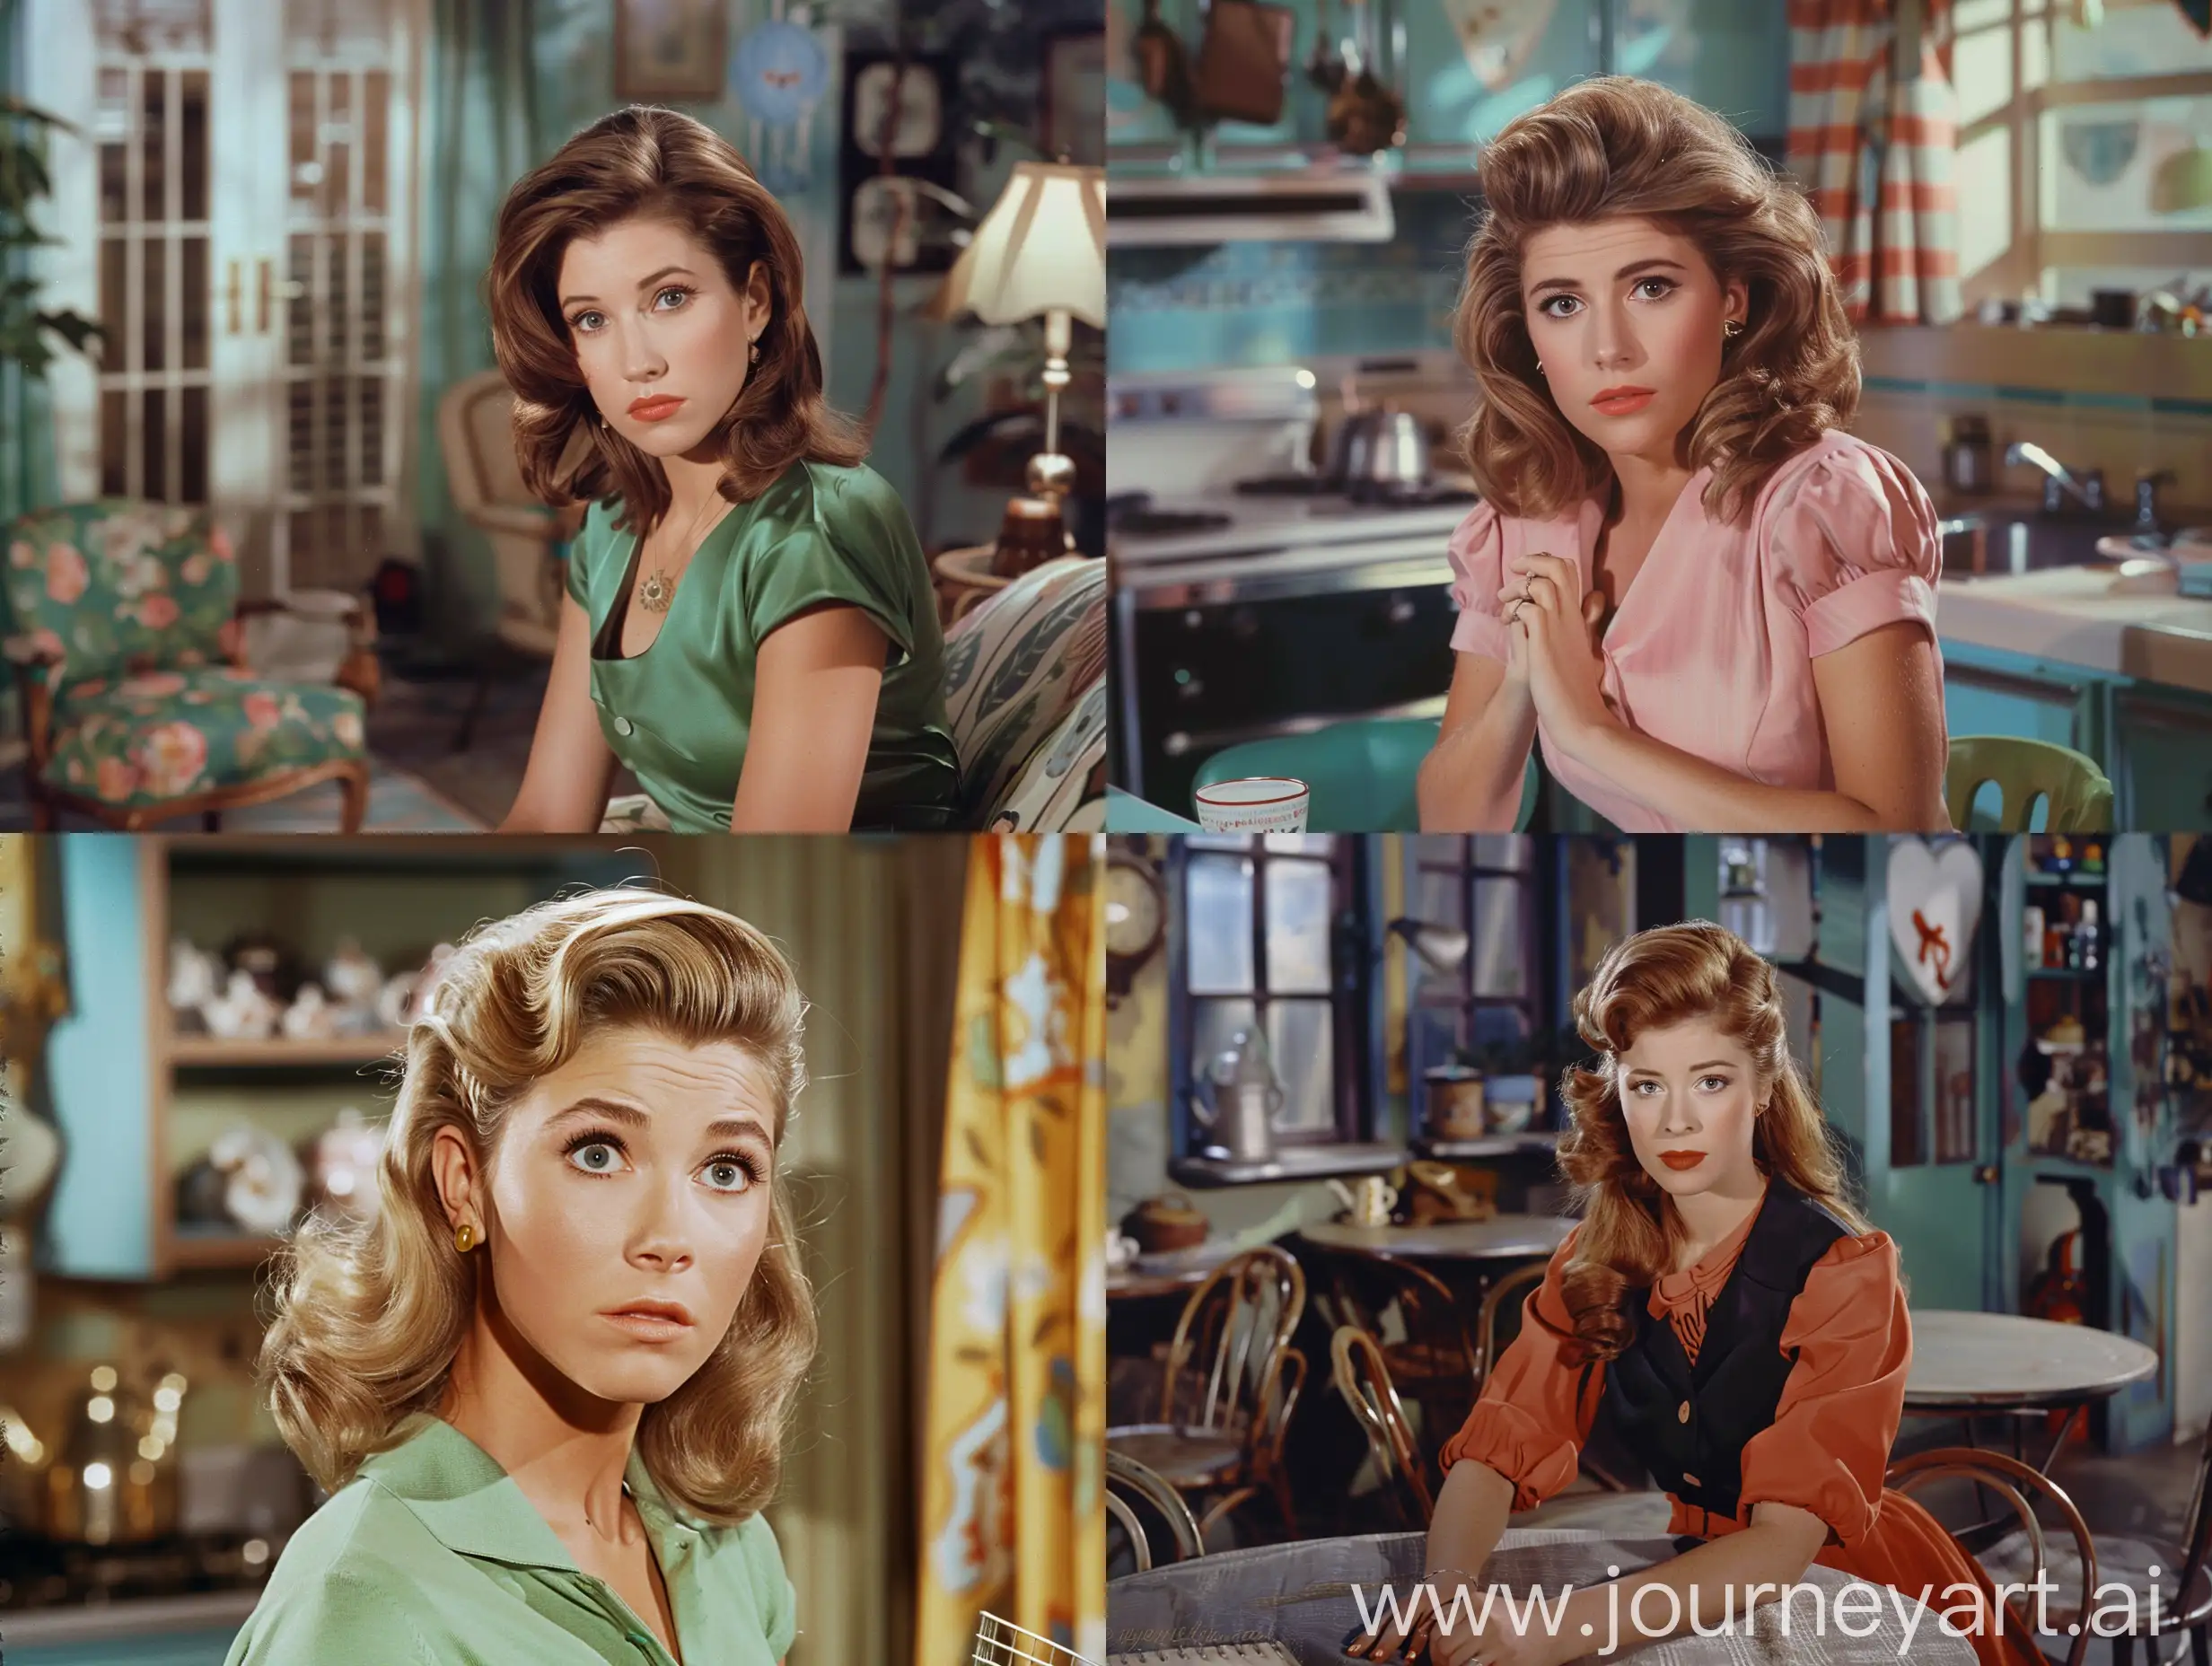 rachel green from friend series,1950's style, super panavision 70 film stock,colory image